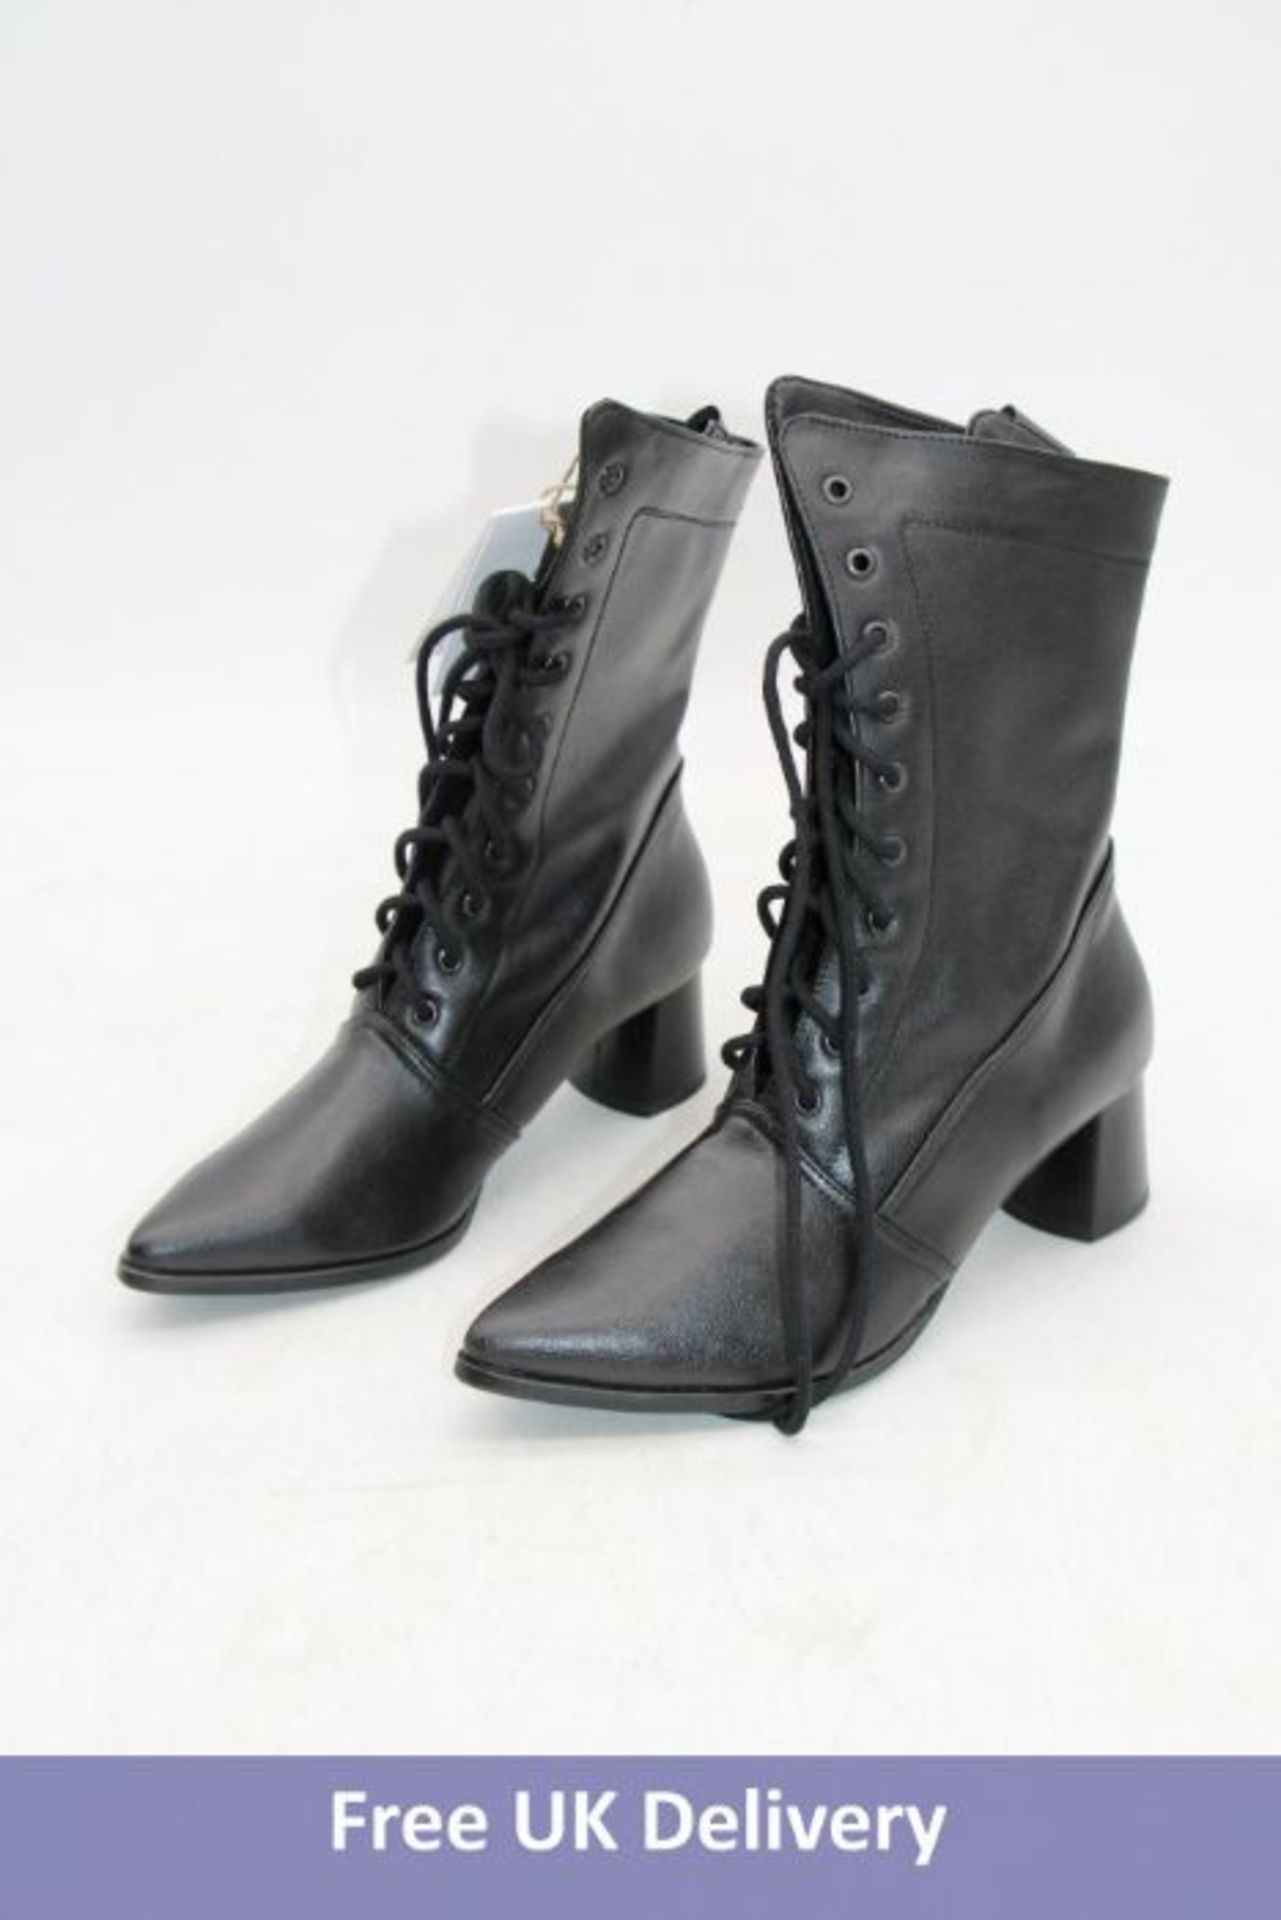 High Boots Cactus Leather Boots, Black, Size 39, No Box